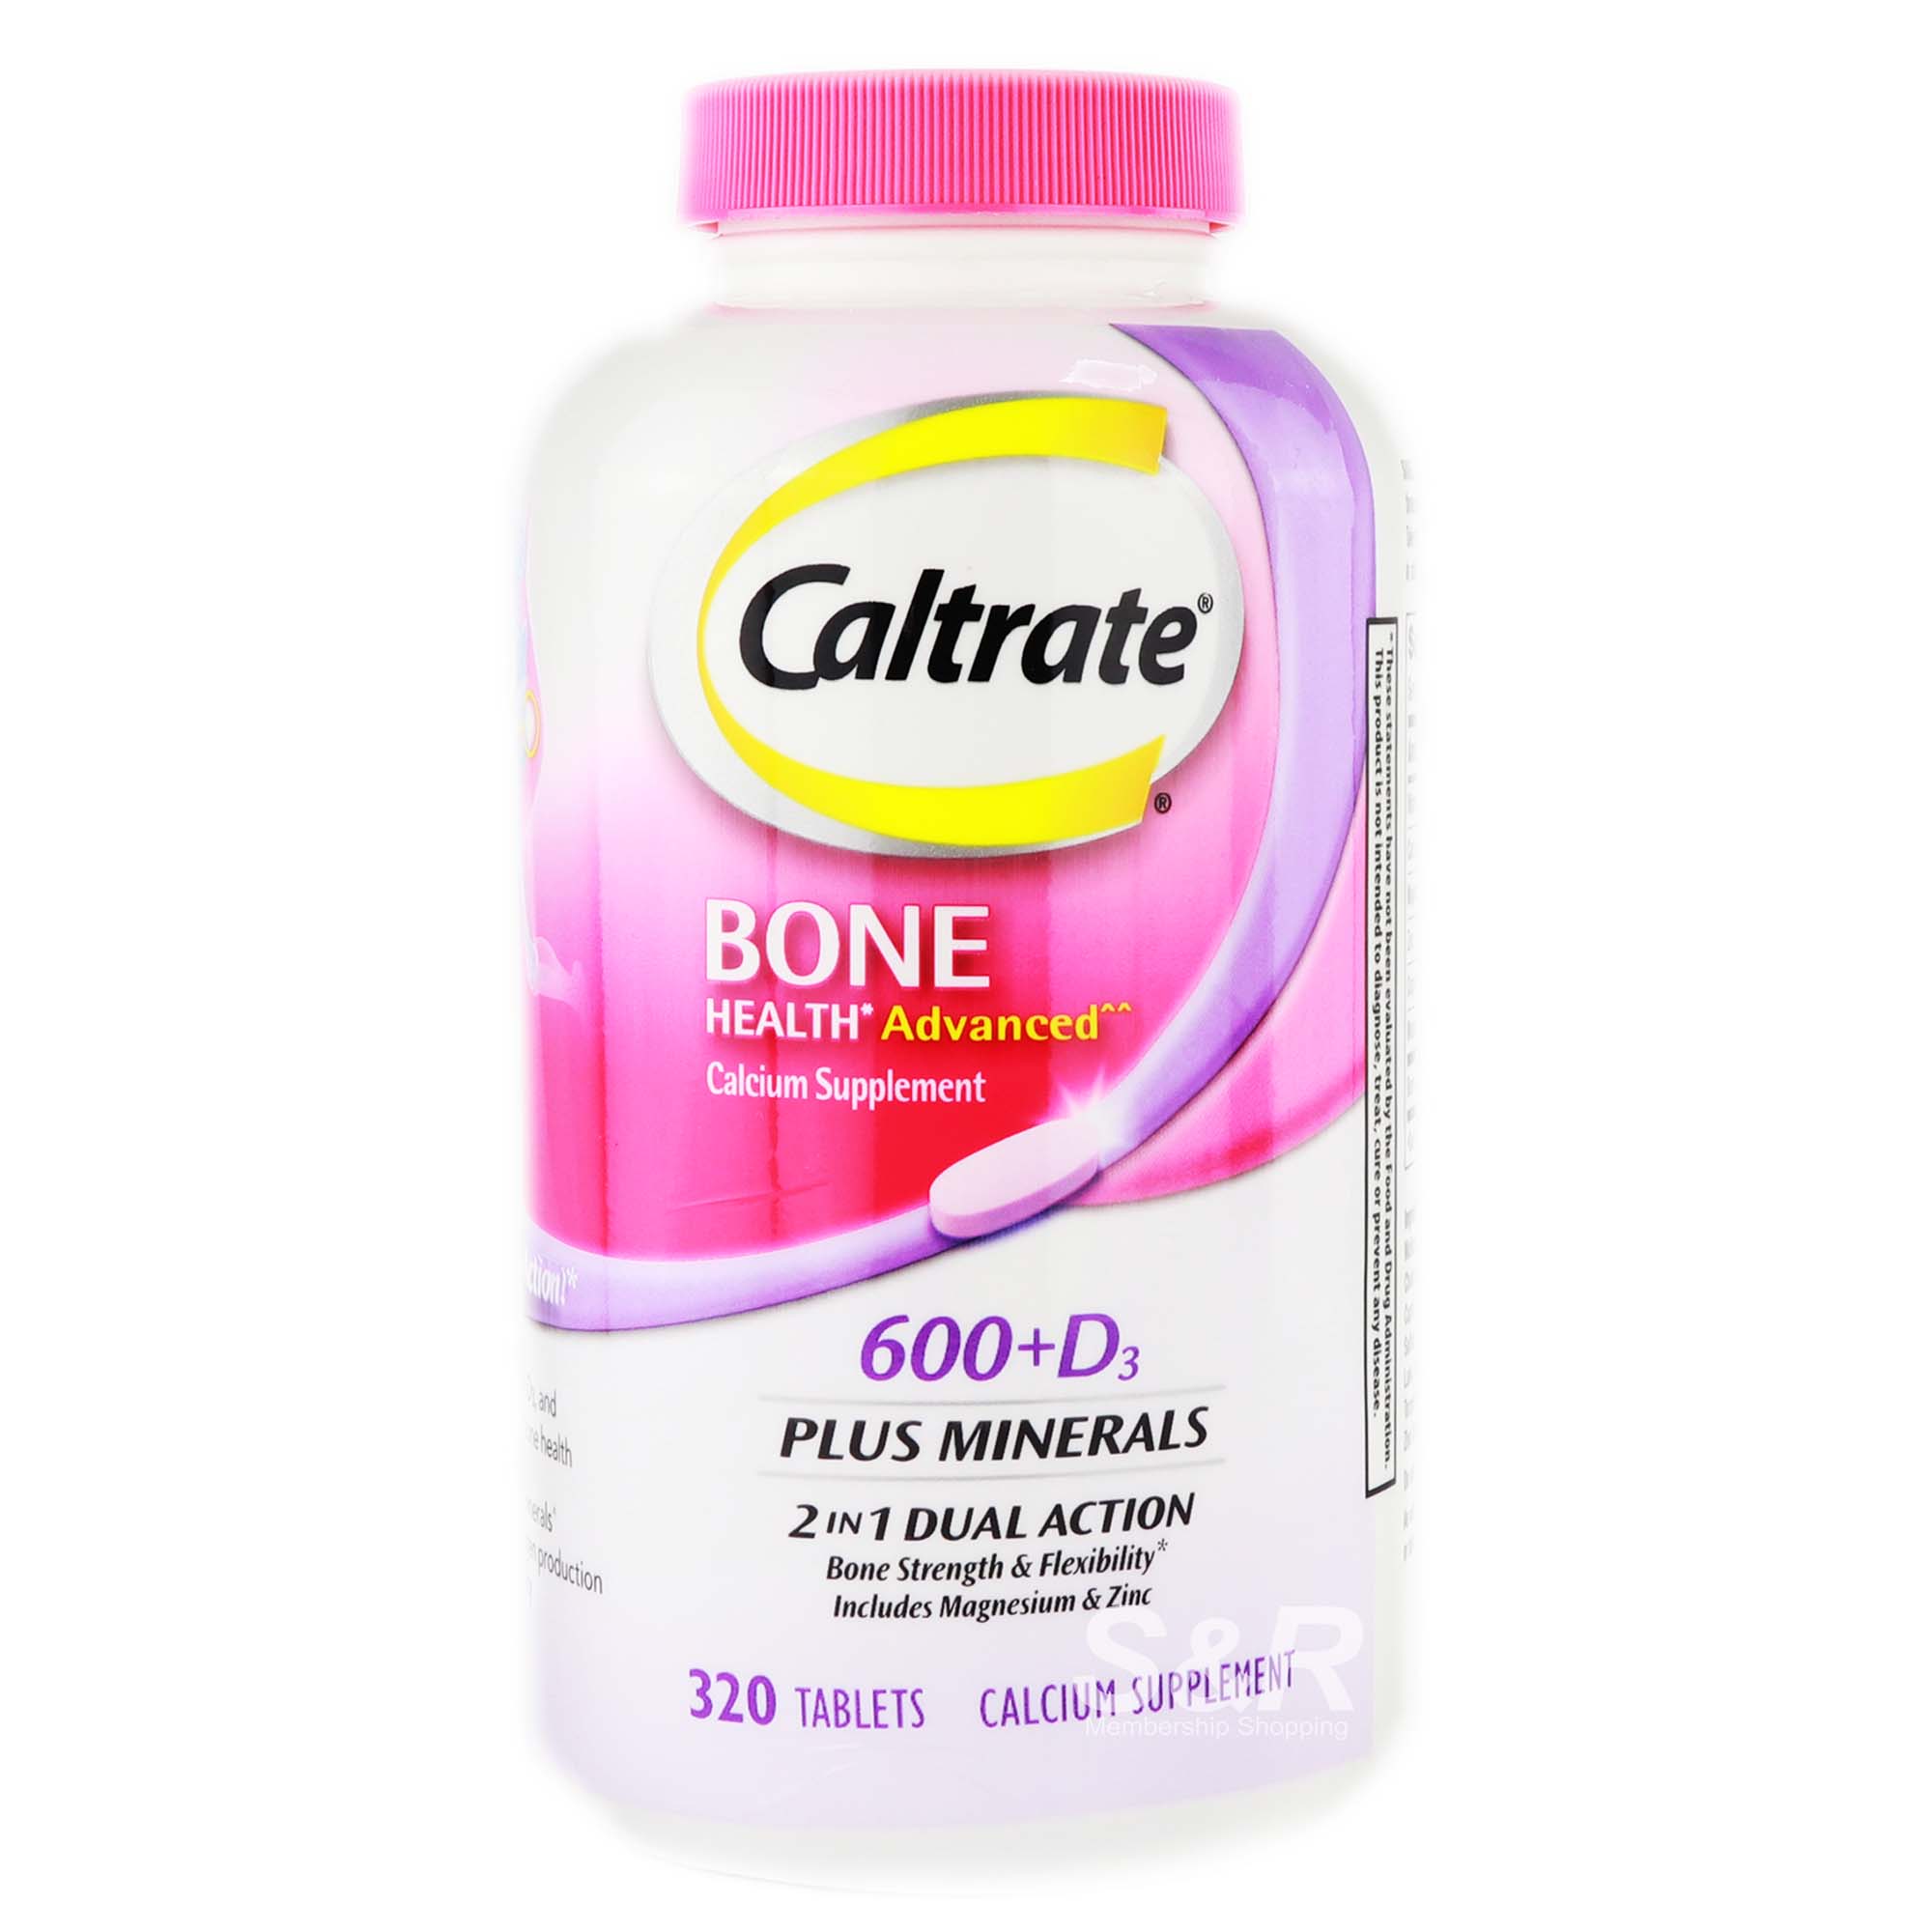 Caltrate Bone Health Advanced 600+D3 Plus Minerals Calcium 2-in-1 Dual Action 320 tablets